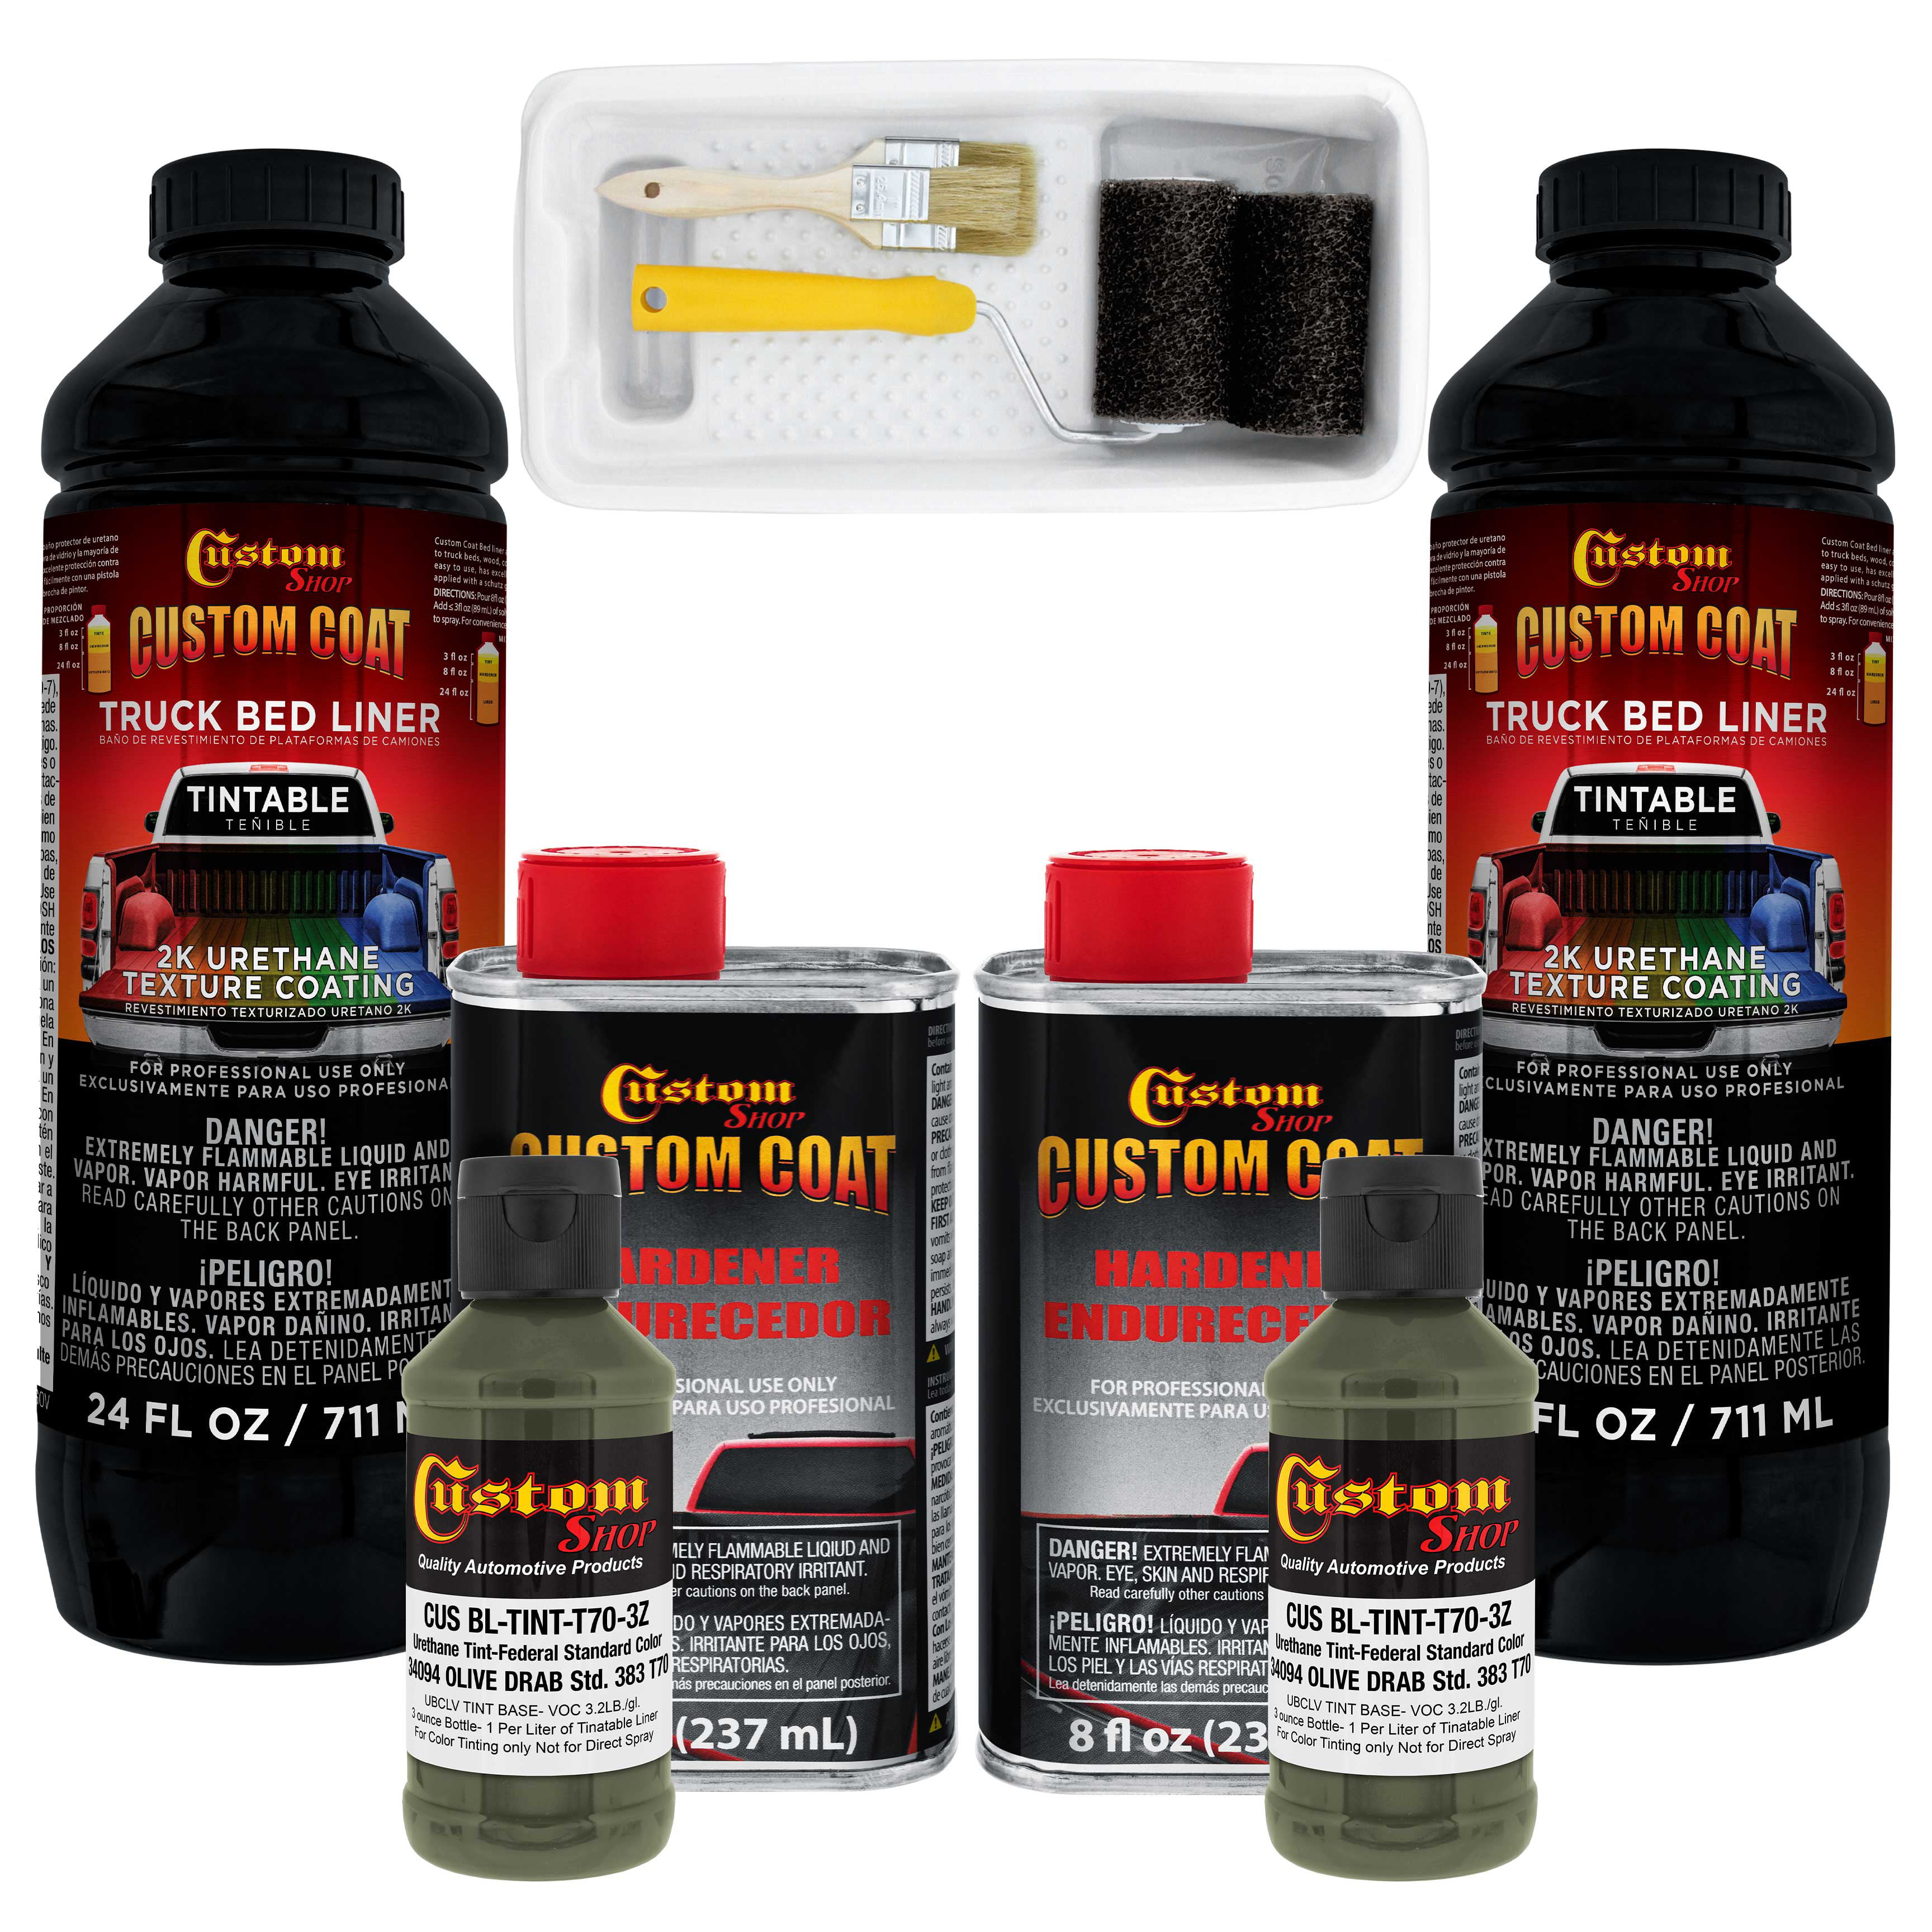 TopCoat F11 Polish & Sealer Kit with Full-Size Spray, Travel Bottle, and 2  Microfiber Towels 